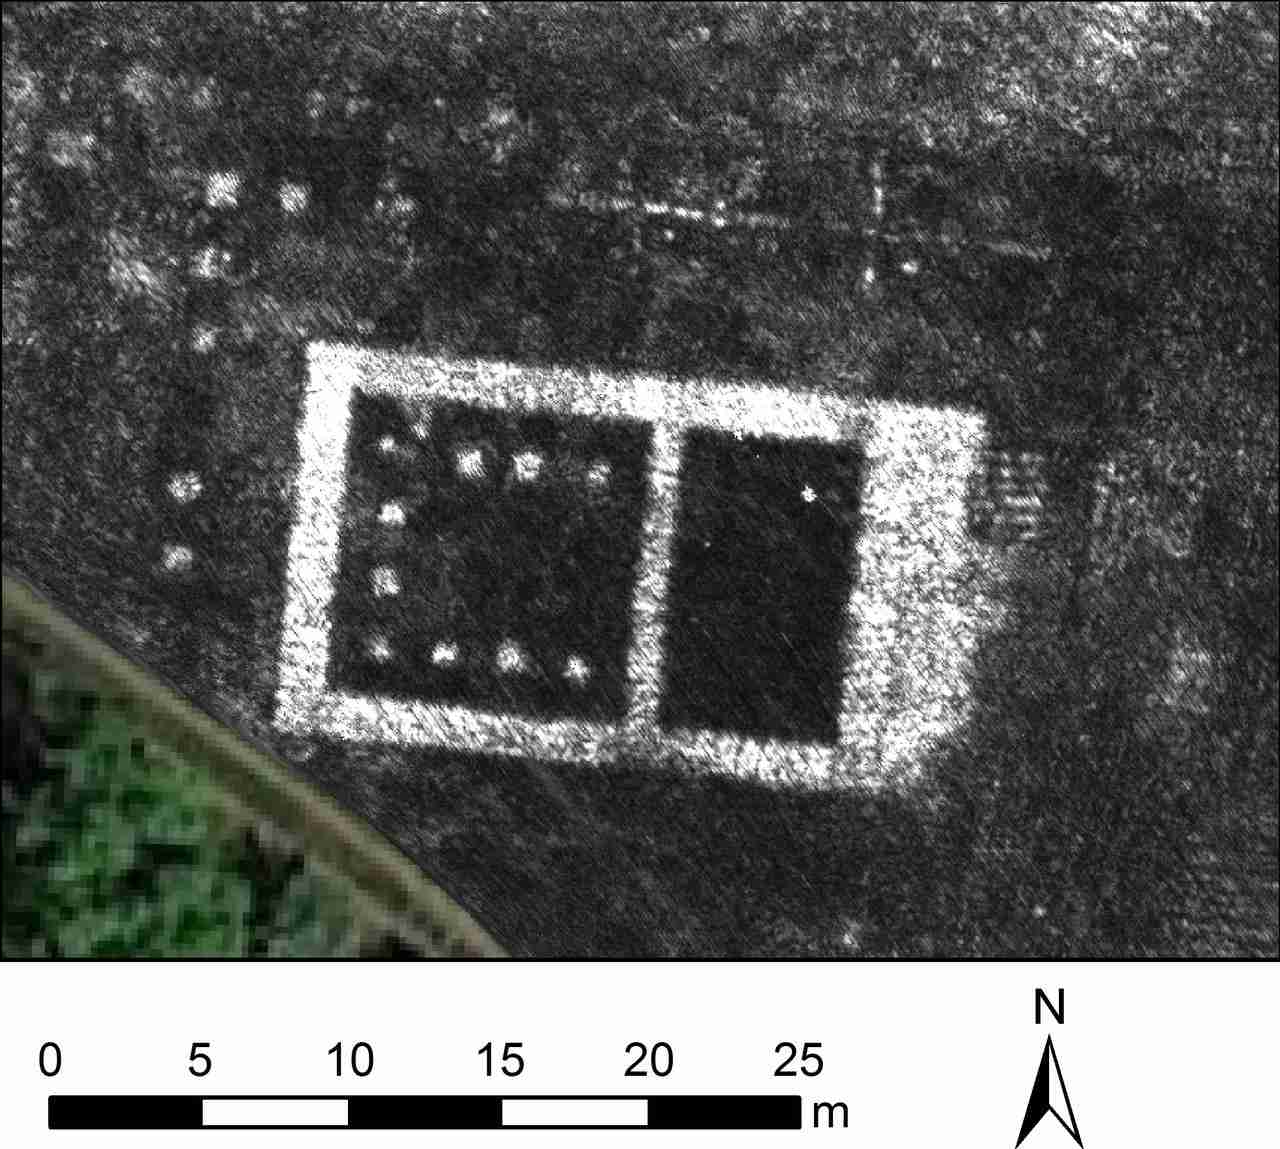 A slice of GPR data from the ancient Roman city of Falerii Novi in Italy reveals the outlines of the town's buildings, captured on 8 May 2020. Image: L Verdonck via Reuters